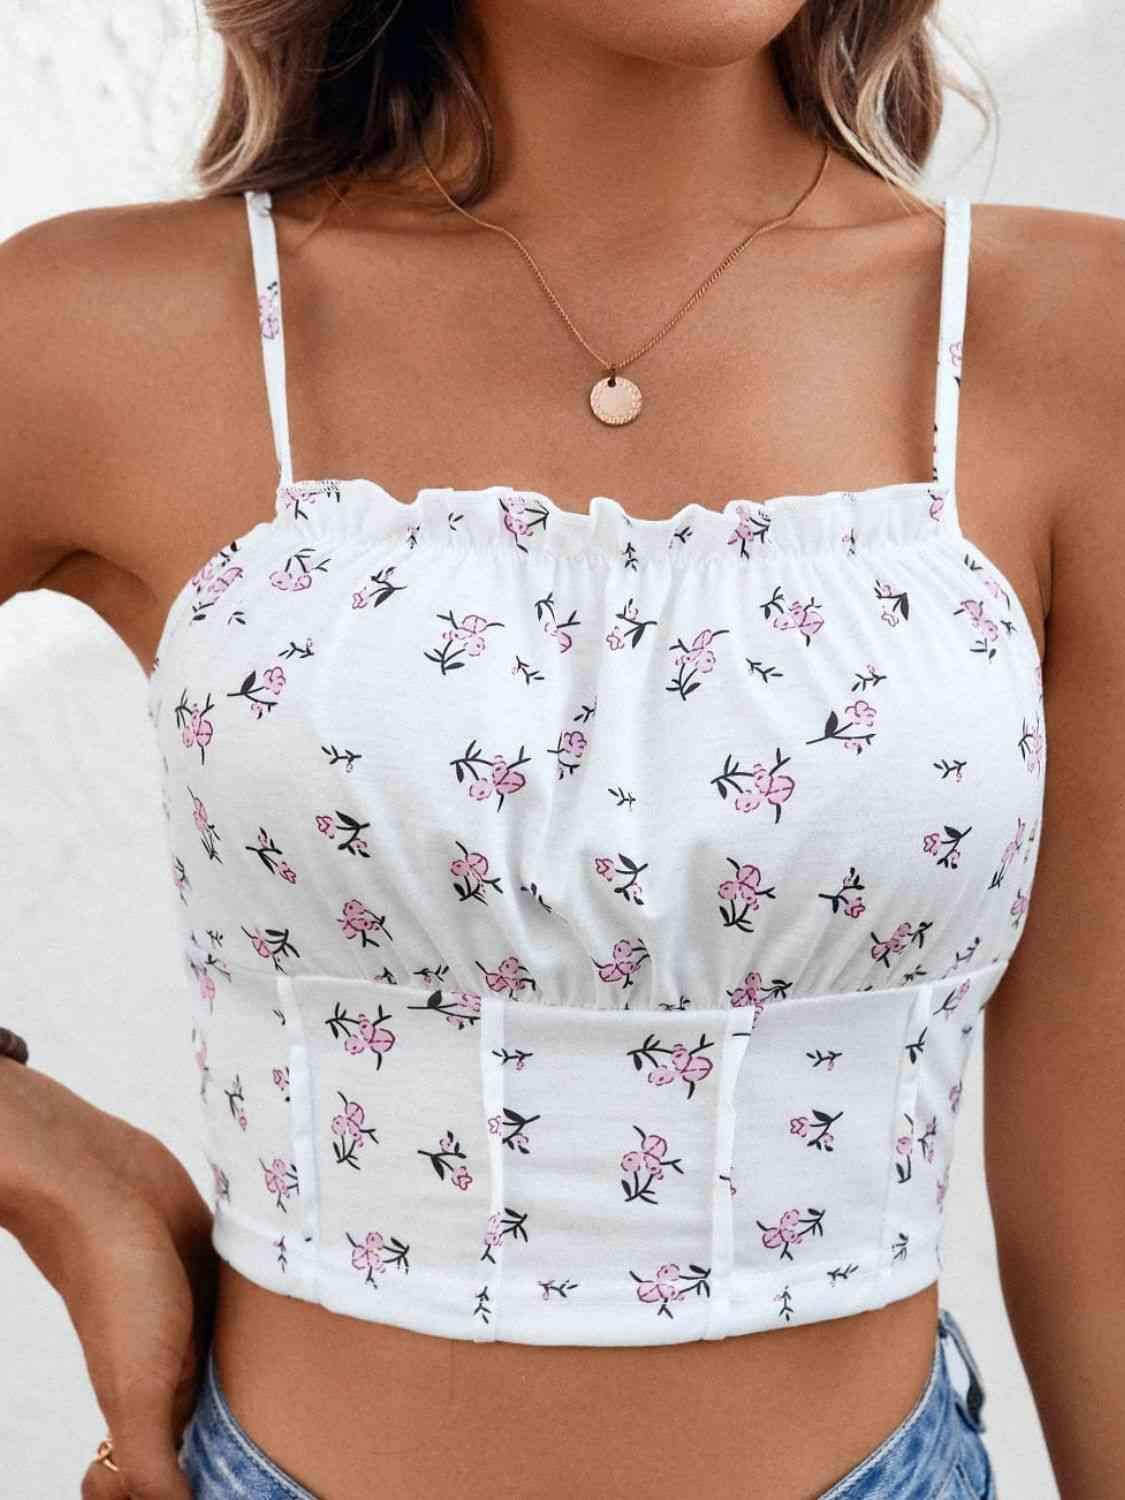 a woman wearing a white top with pink flowers on it